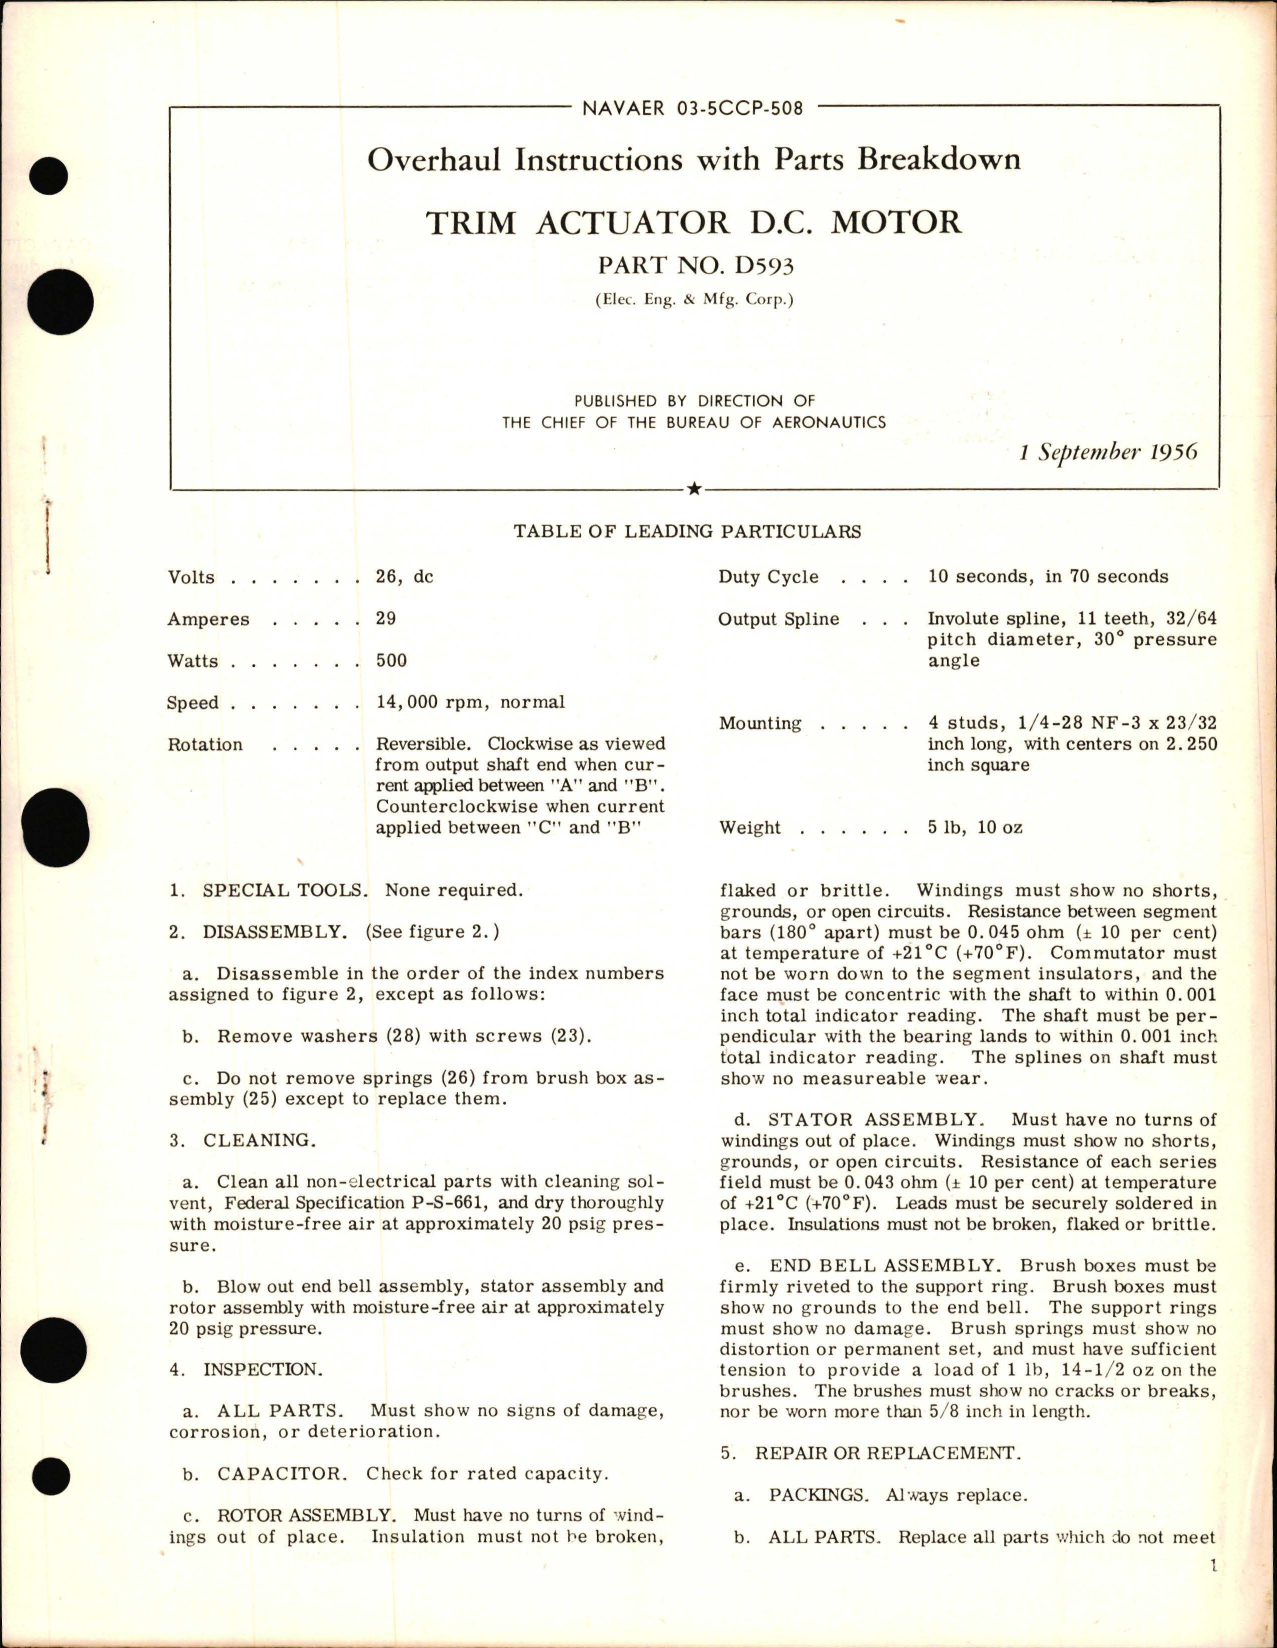 Sample page 1 from AirCorps Library document: Overhaul Instructions with Parts Breakdown for Trim Actuator DC Motor - Part D593